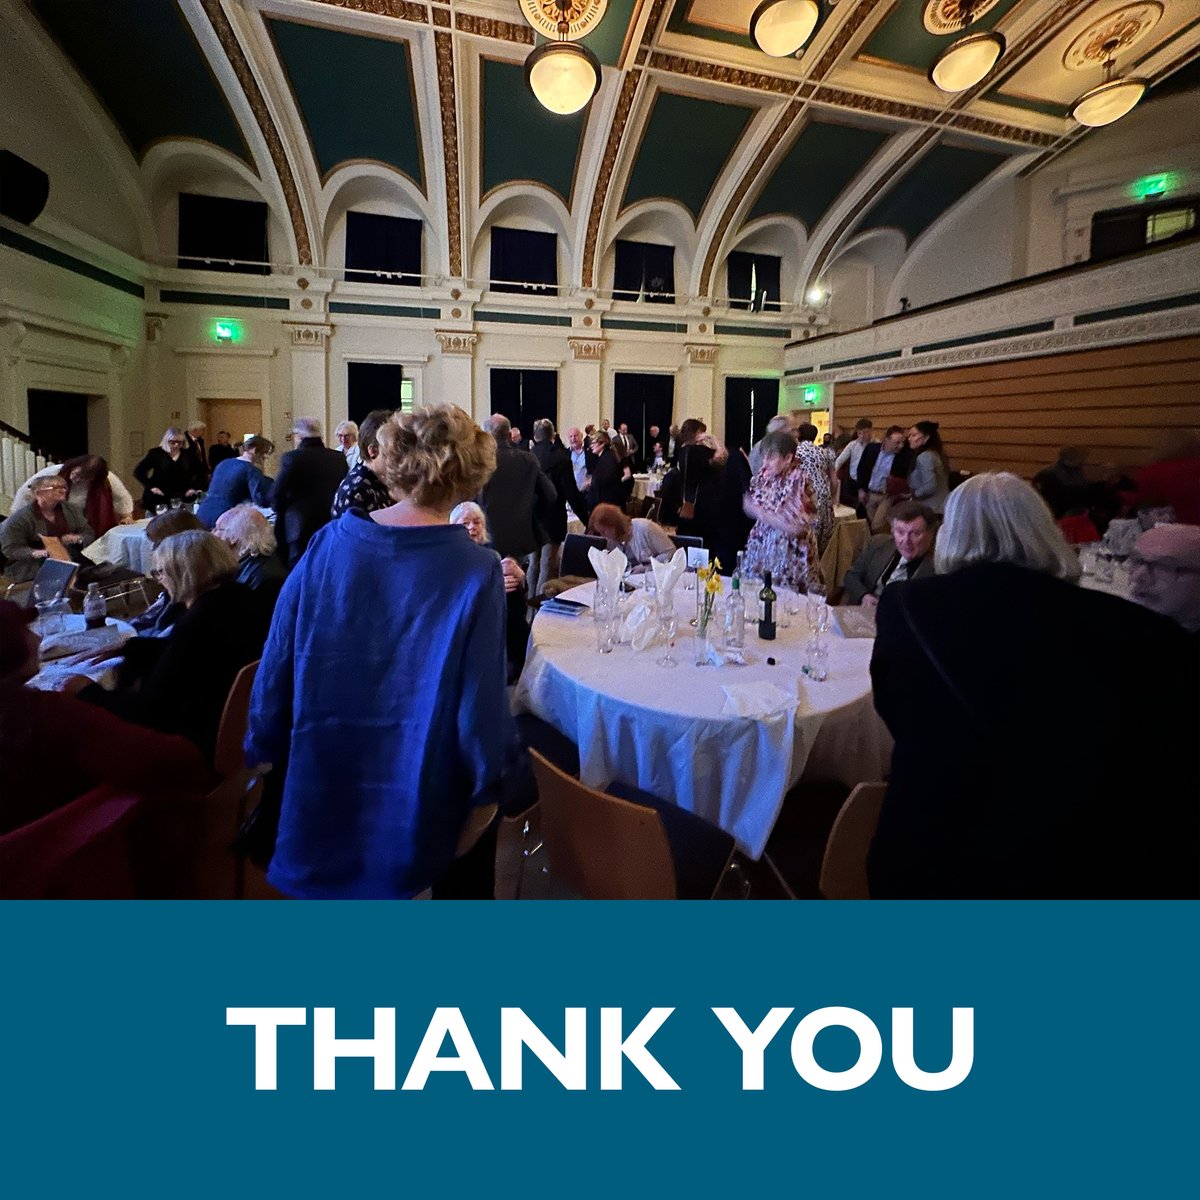 We want to thank all involved in the Heritage Angel Awards this year. Without you, we couldn't have made this amazing event happen. We had a blast on Wednesday night. Next week, we will share some of the official photographs from the ceremony. Until then, have a Happy Easter!